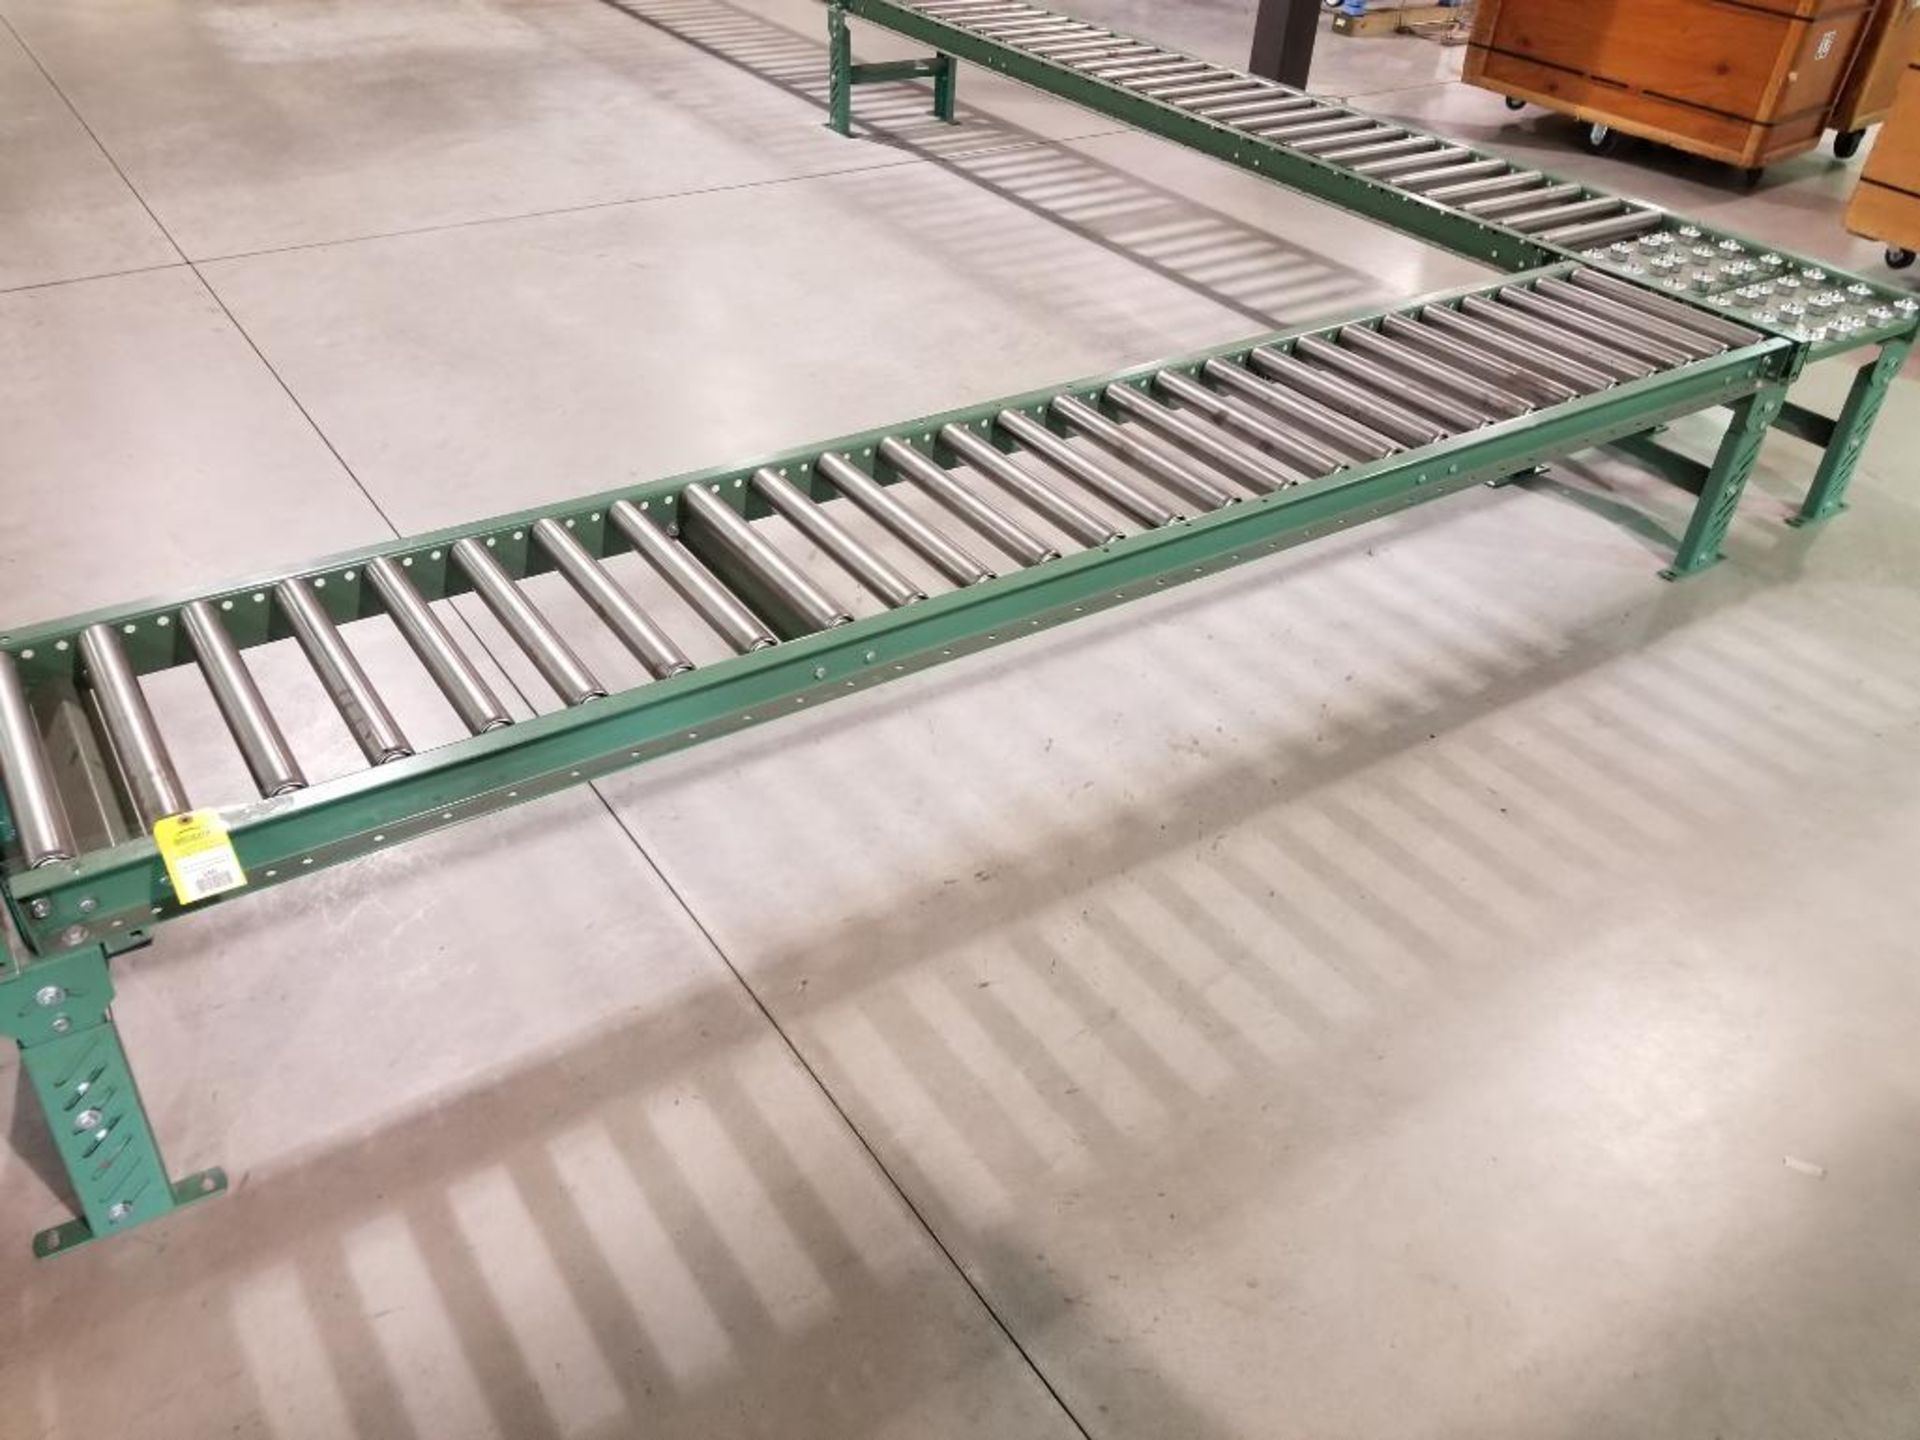 10ft roller conveyor section. 20in wide by 20in tall. (legs are adjustable to change height)